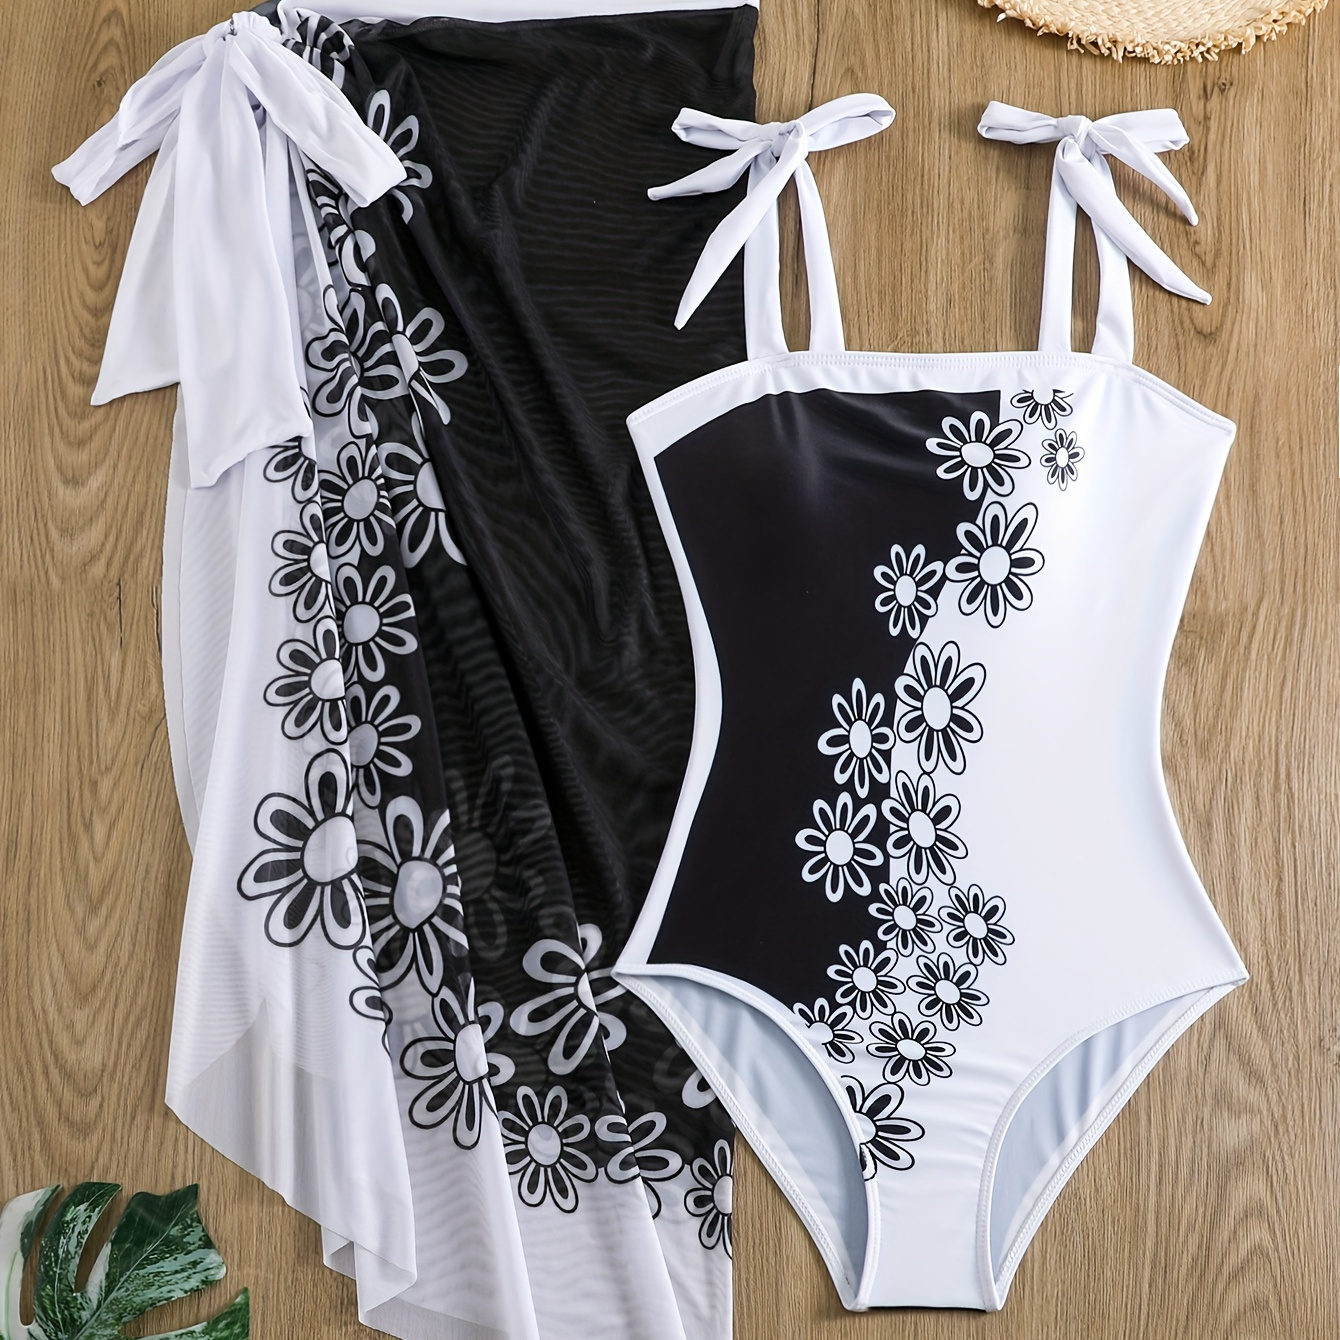 

Floral Print Black & White Color Block 2 Piece Swimsuits, Tie Shoulder High Stretch Elegant One-piece Bathing-suit & Cover Up Skirt, Women's Swimwear & Clothing For Holiday